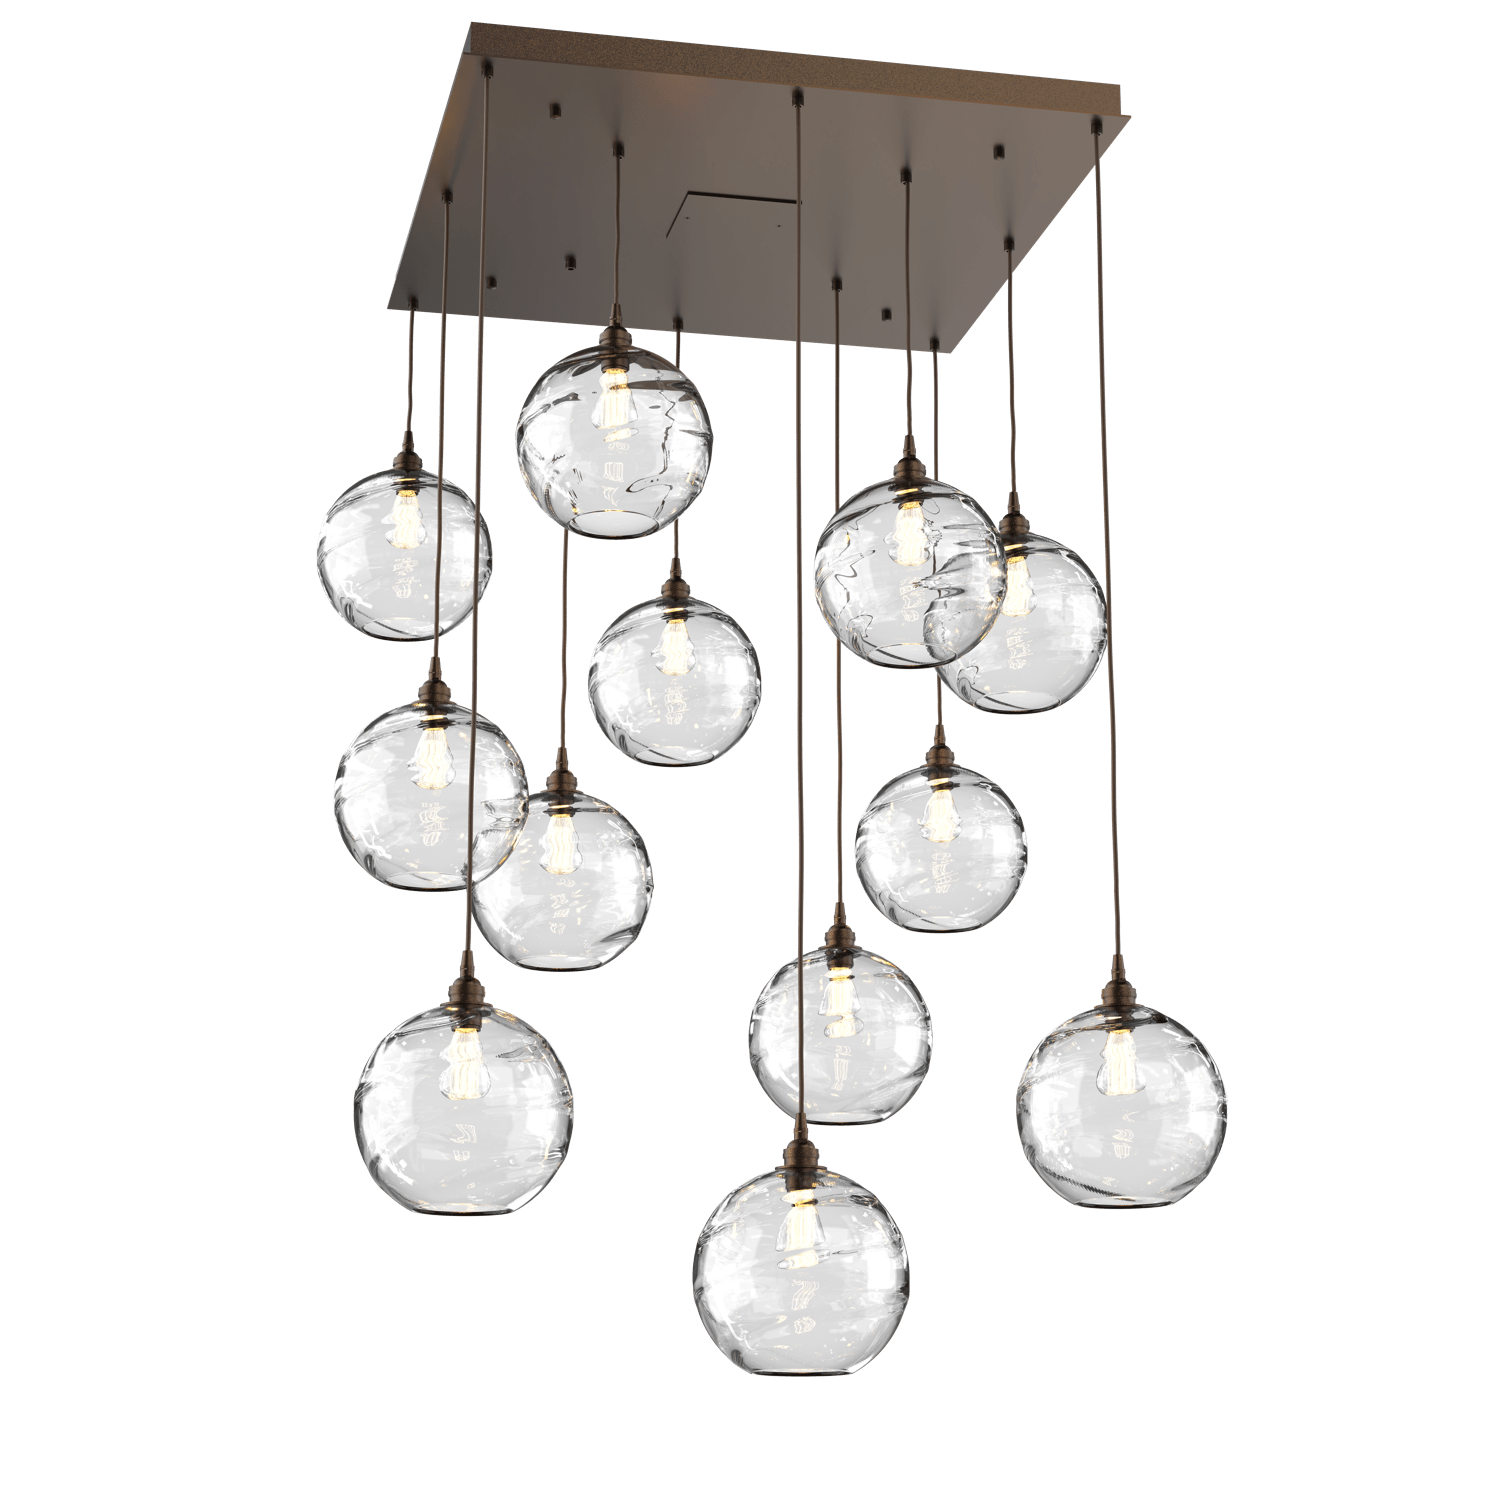 CHB0047-12-FB-OC-Hammerton-Studio-Optic-Blown-Glass-Terra-12-light-square-pendant-chandelier-with-flat-bronze-finish-and-optic-clear-blown-glass-shades-and-incandescent-lamping